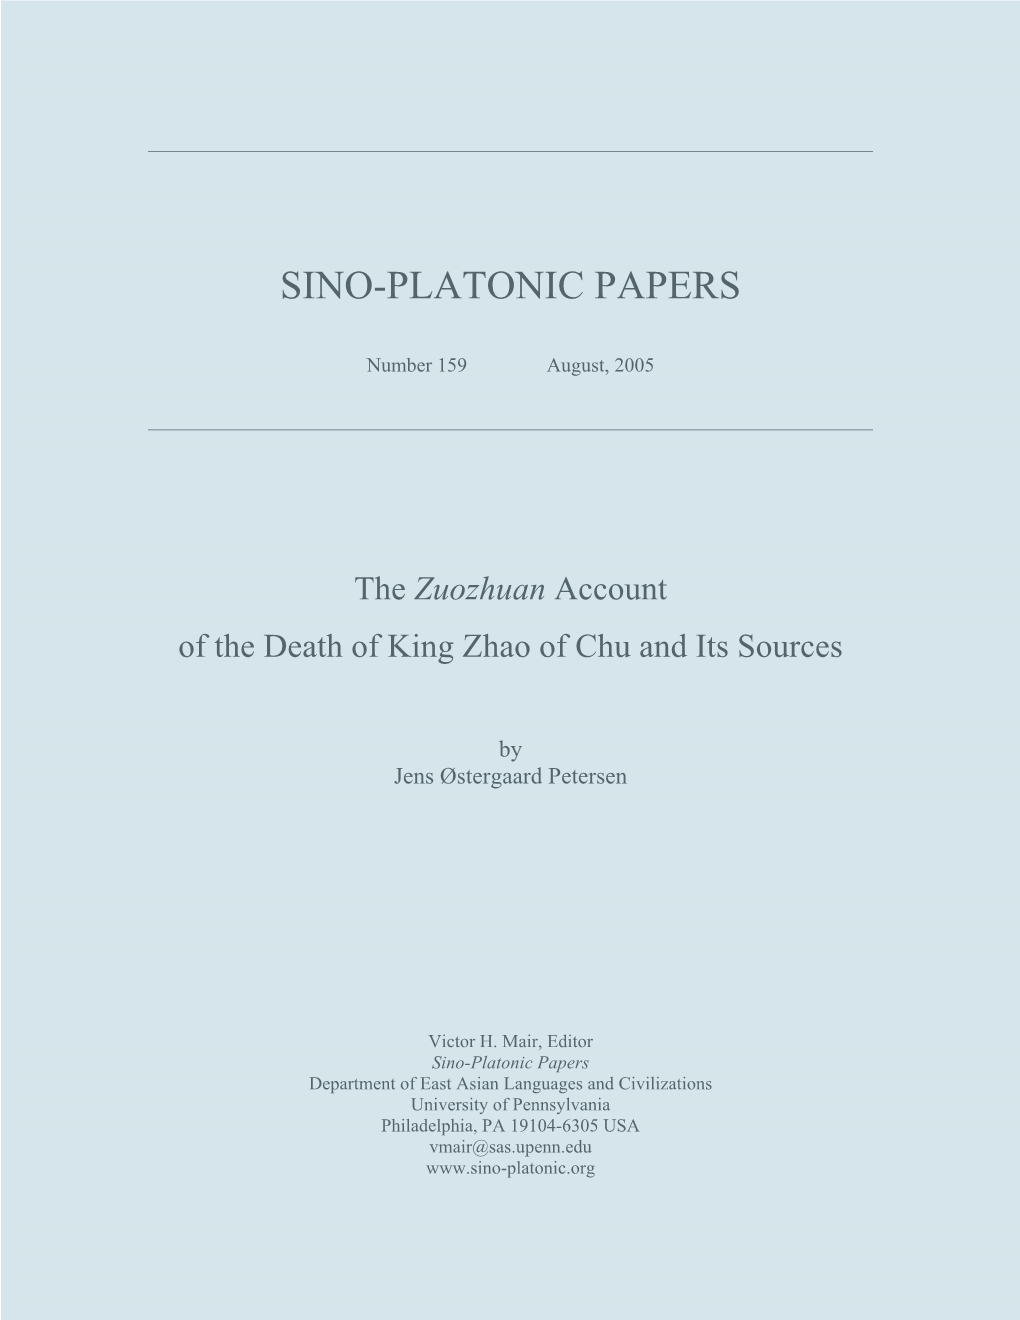 The Zuozhuan Account of the Death of King Zhao of Chu and Its Sources